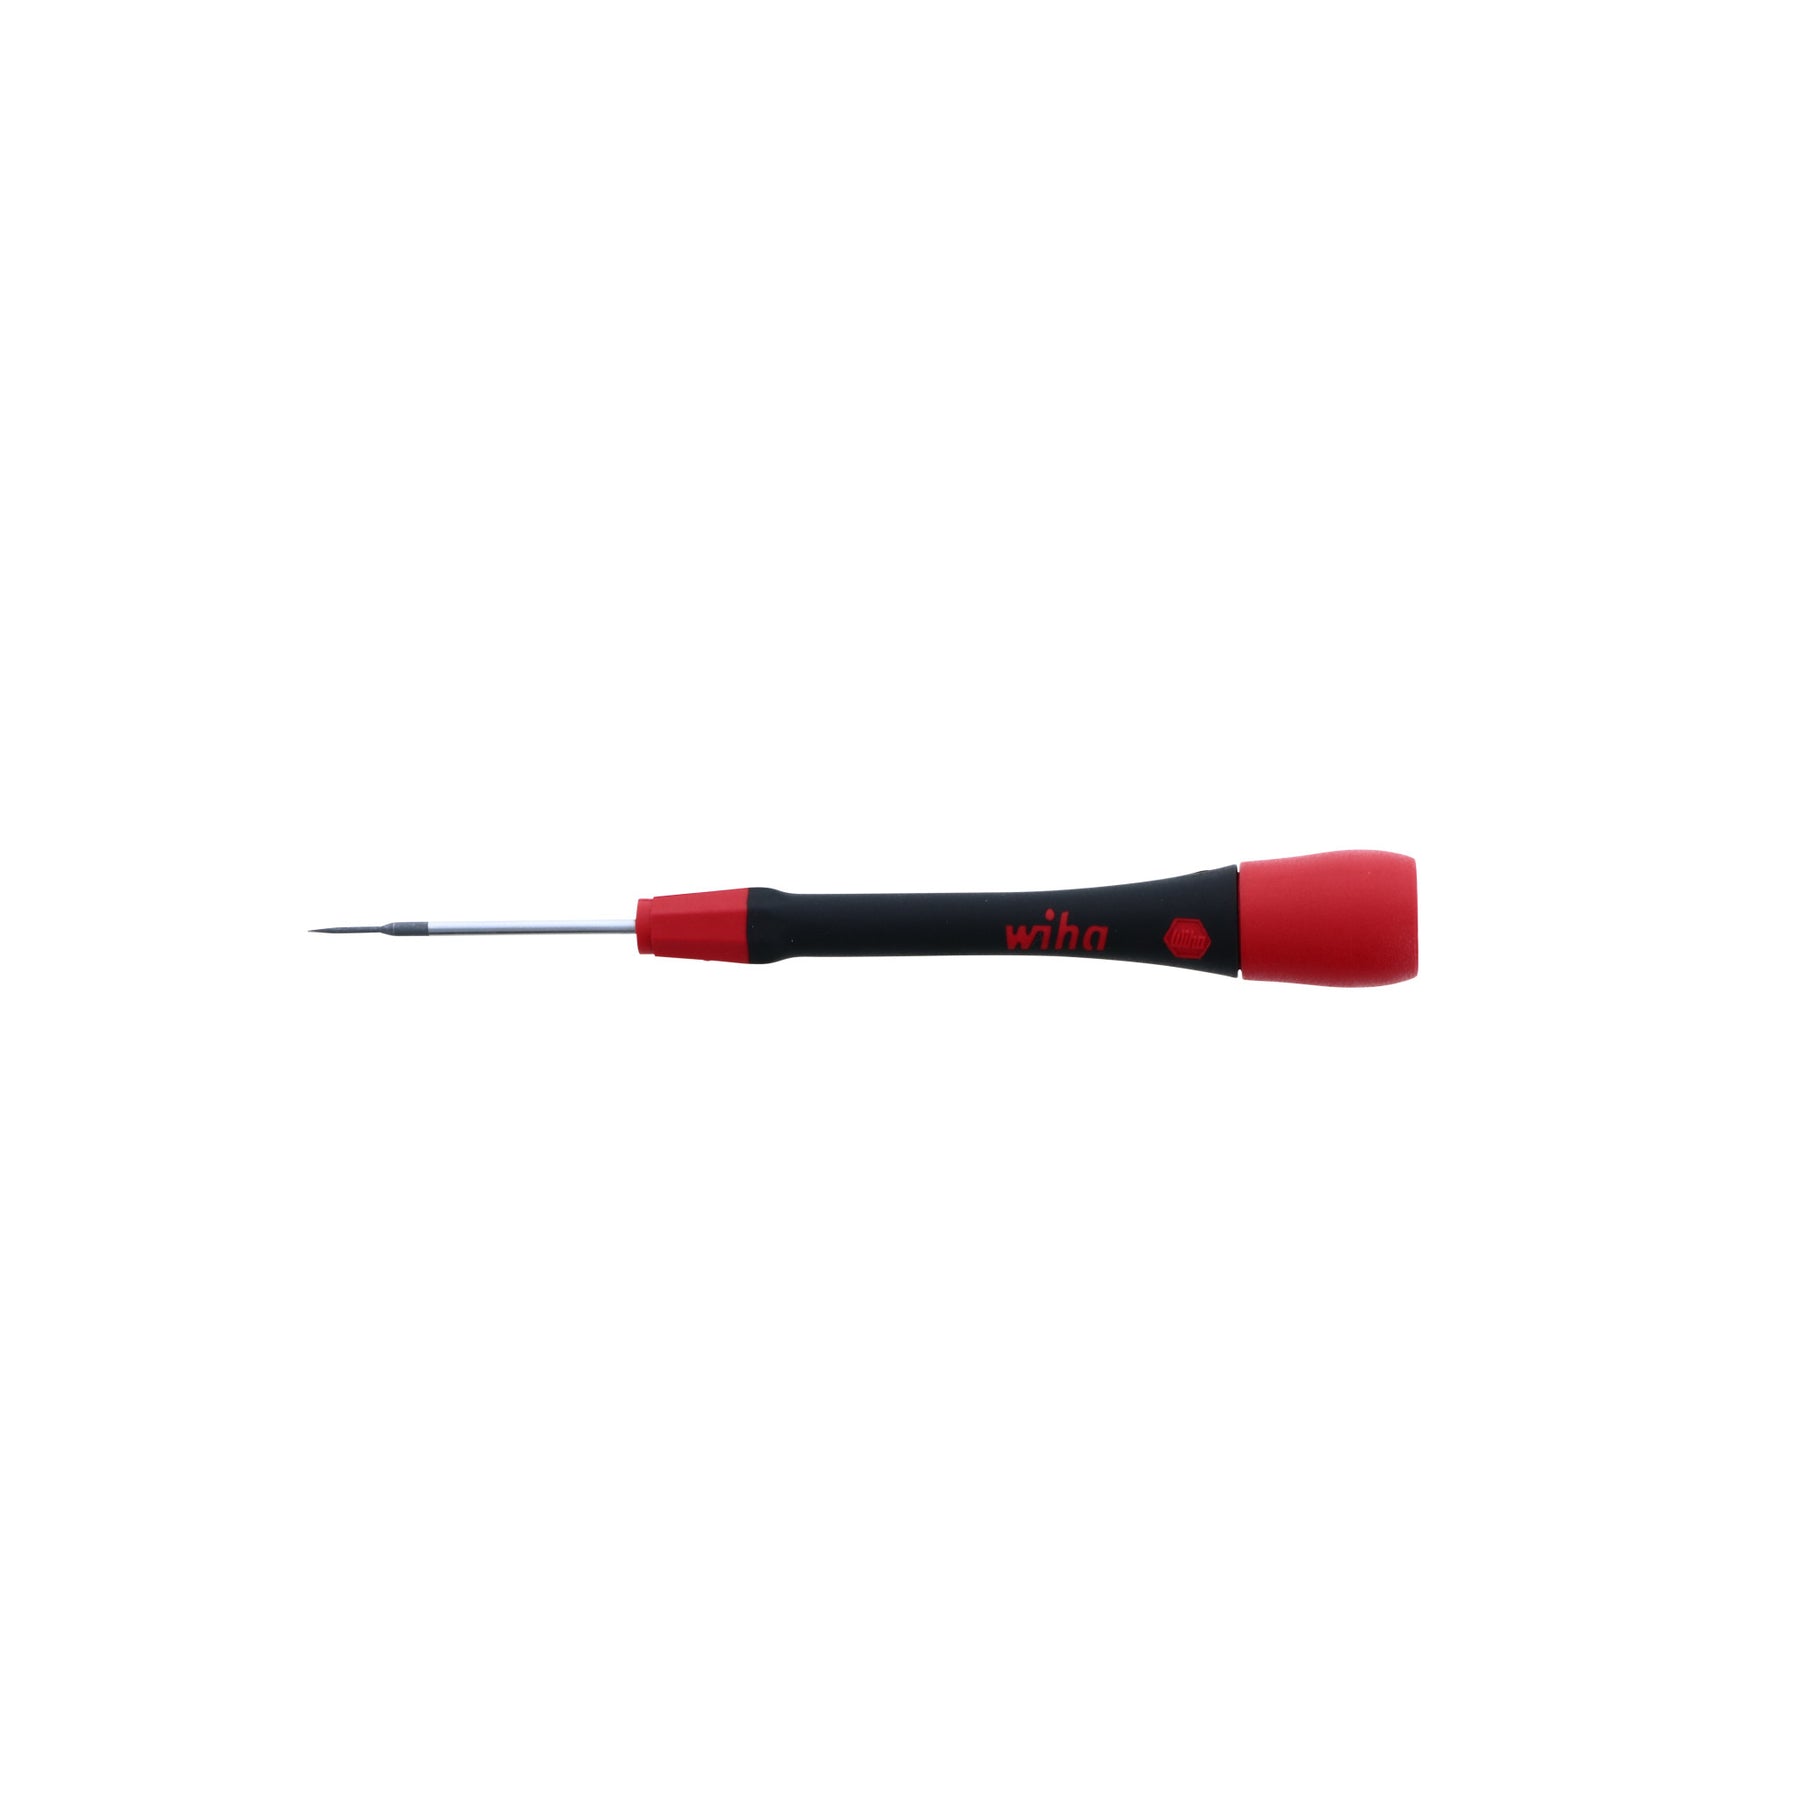 PicoFinish Slotted Screwdriver 1.0mm x 40mm